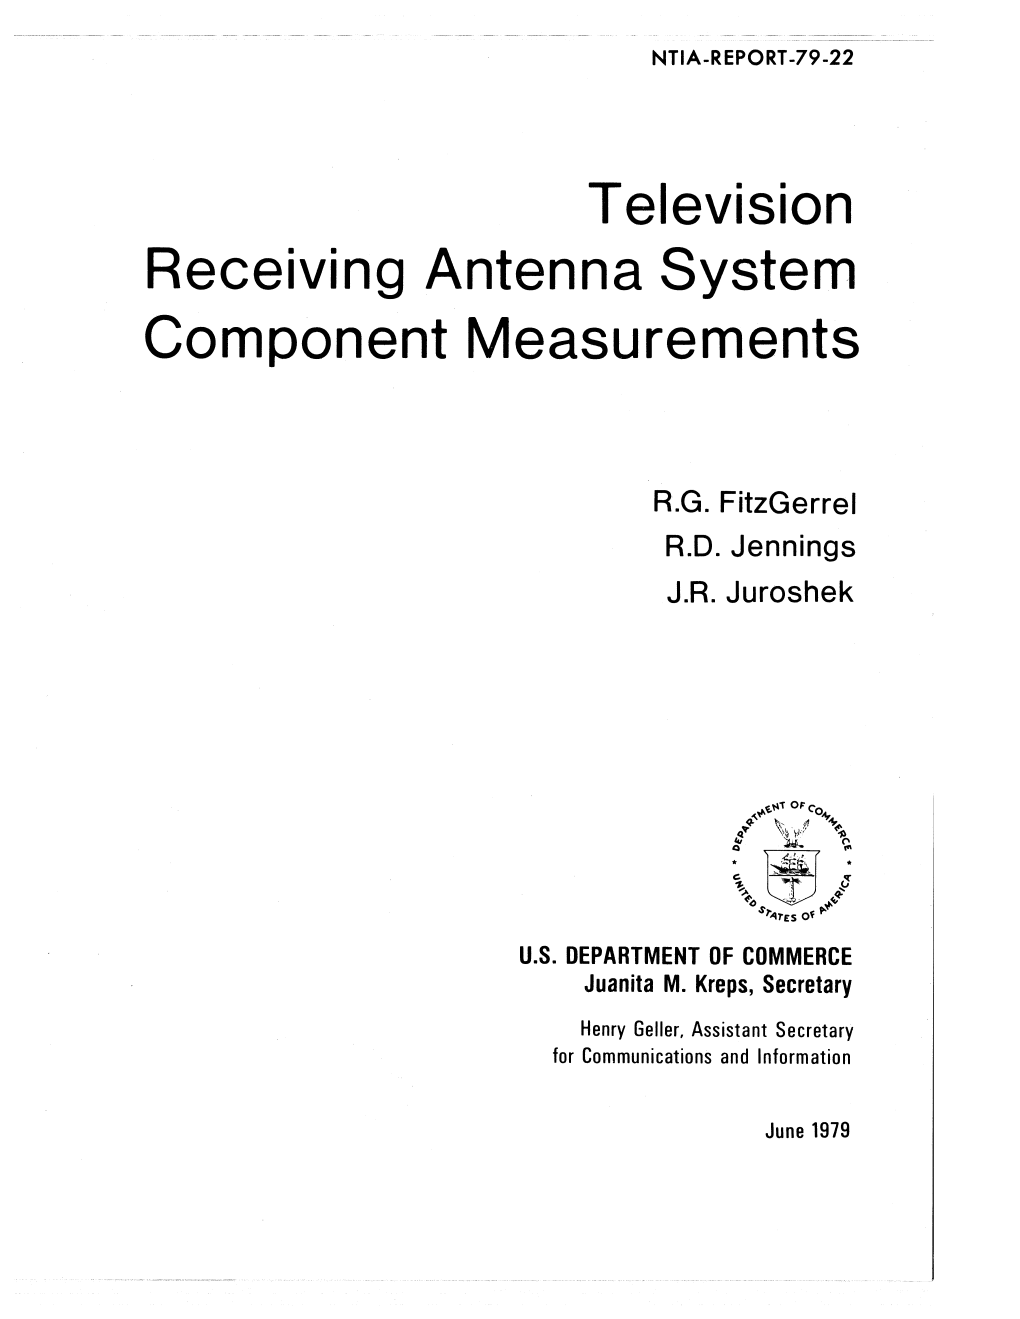 Television Receiving Antenna System Component Measurements